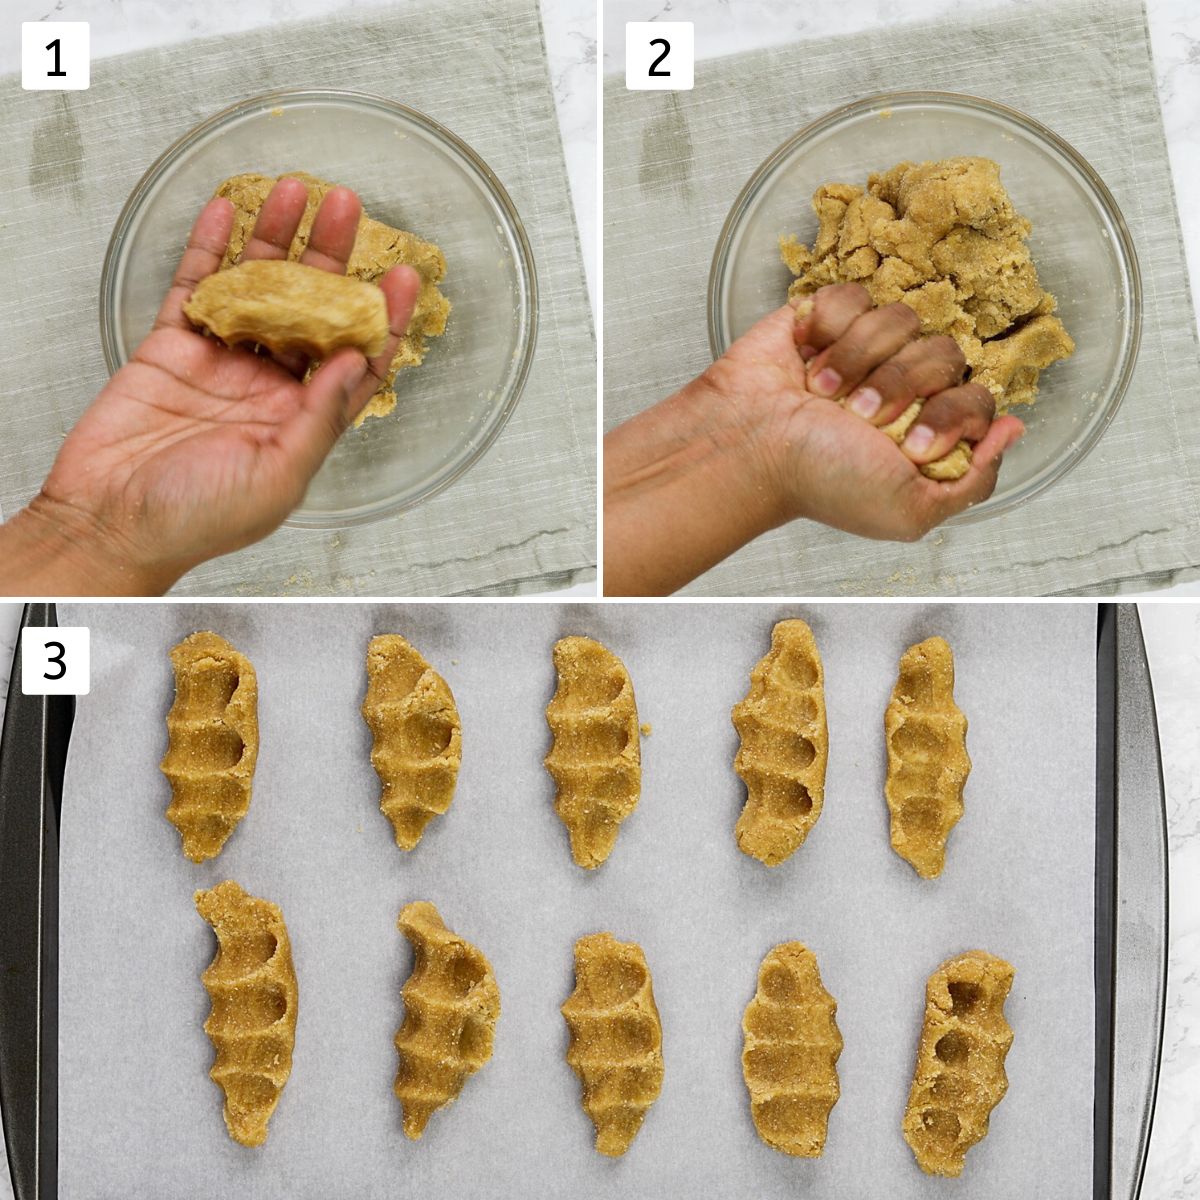 Collage of 3 images showing shaping muthia using feast and arranging on the baking tray.